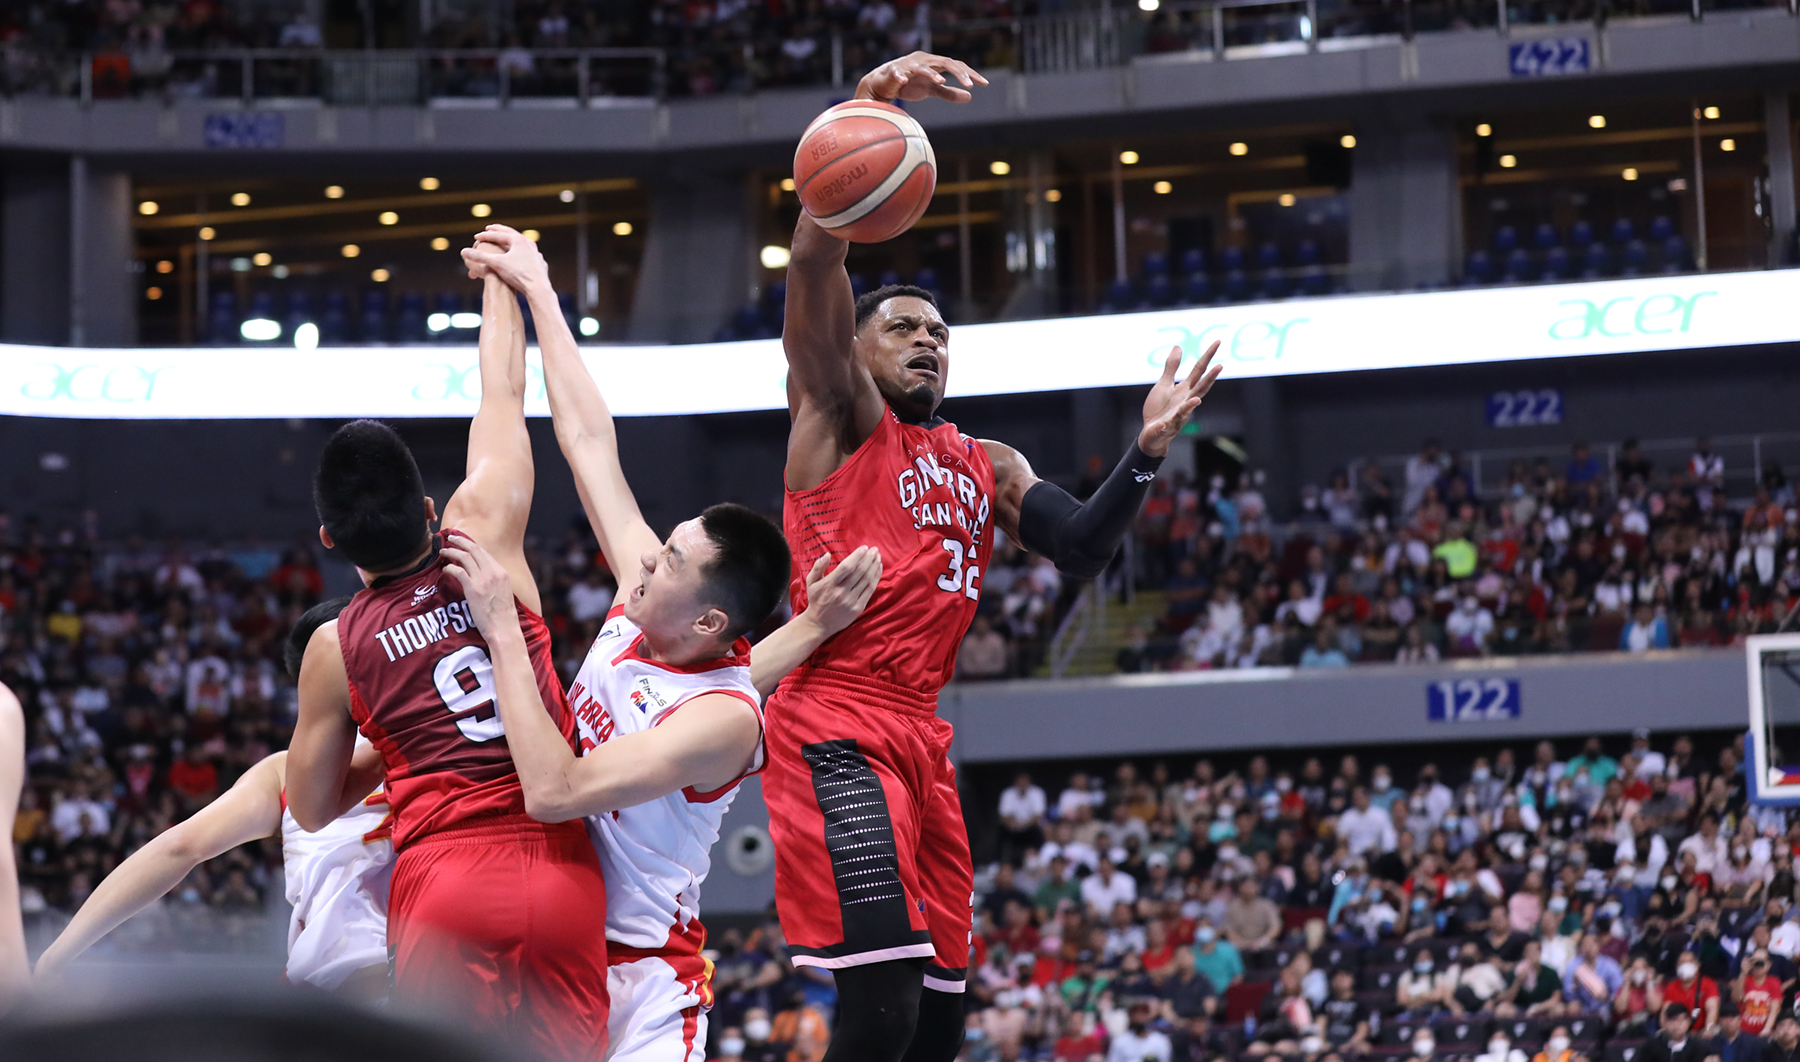 Cone rethinks Ginebra’s Game 6 strategy after win-or-go-home Bay Area reactivates Powell